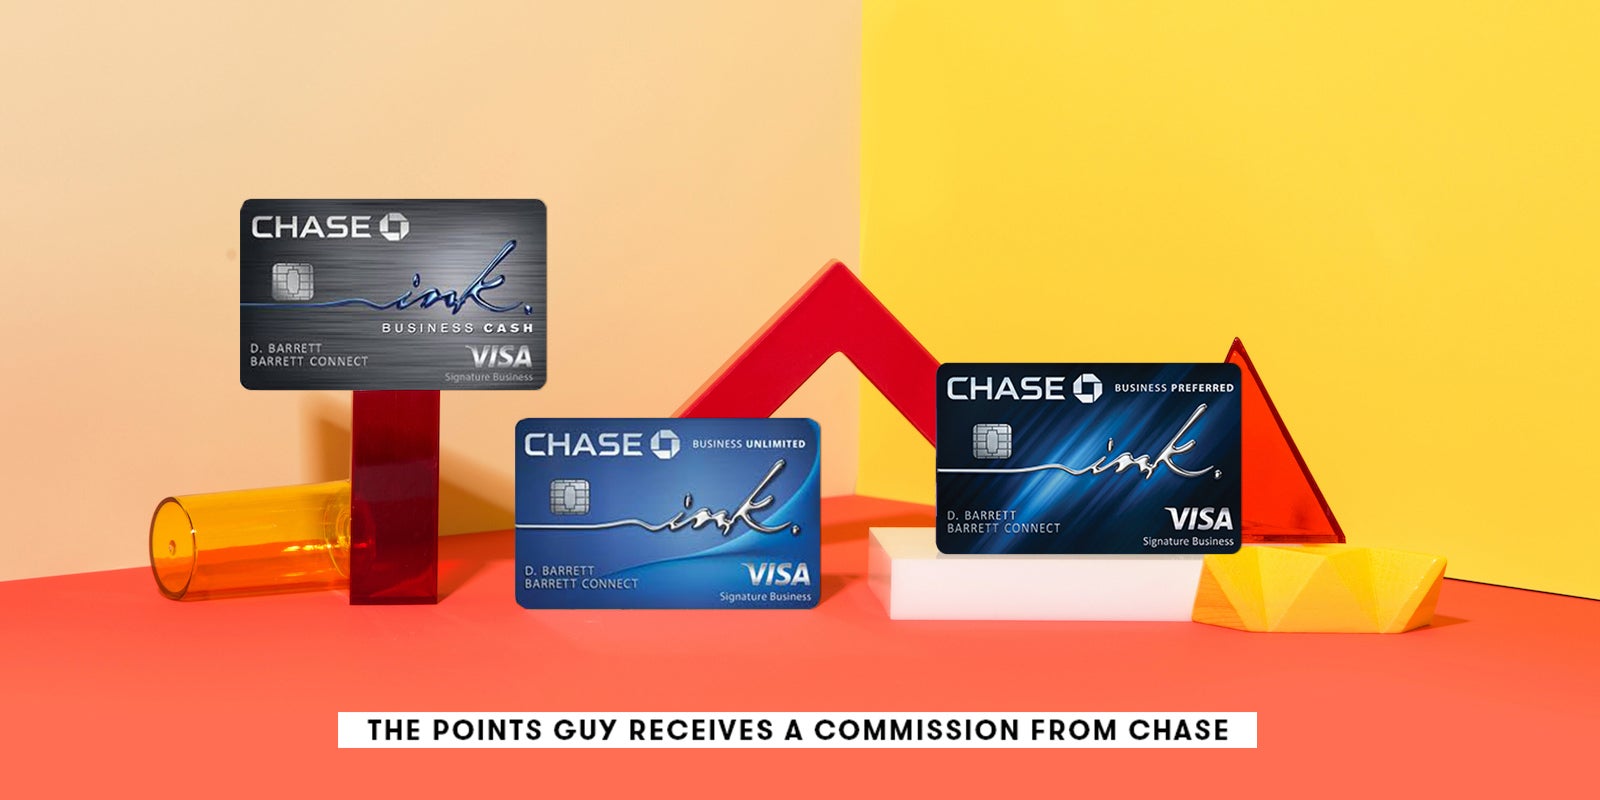 Your guide to the Chase Ink Business credit cards